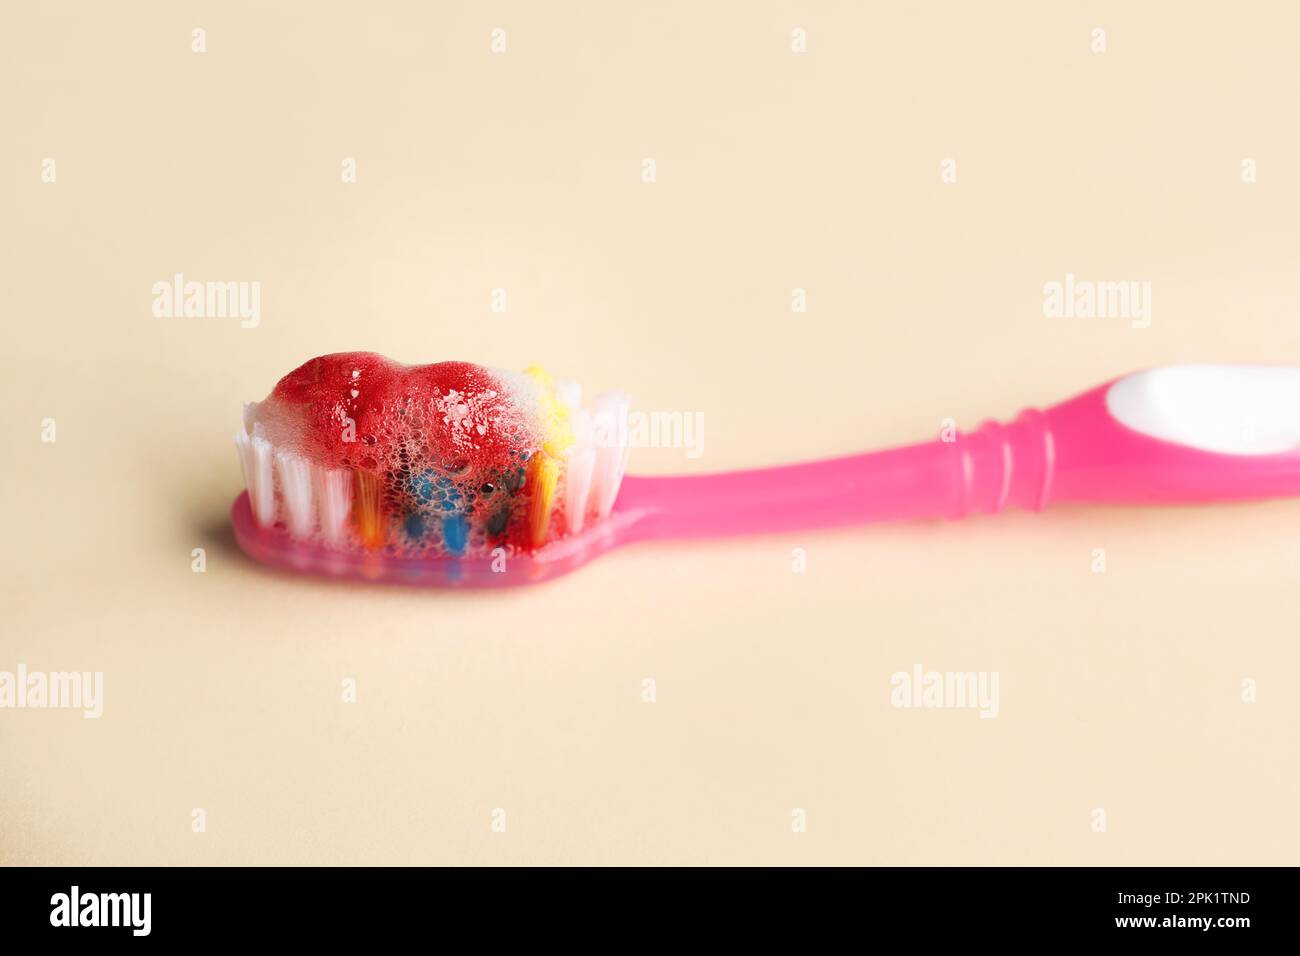 Toothbrush with paste and blood on beige background, closeup. Gum inflammation Stock Photo